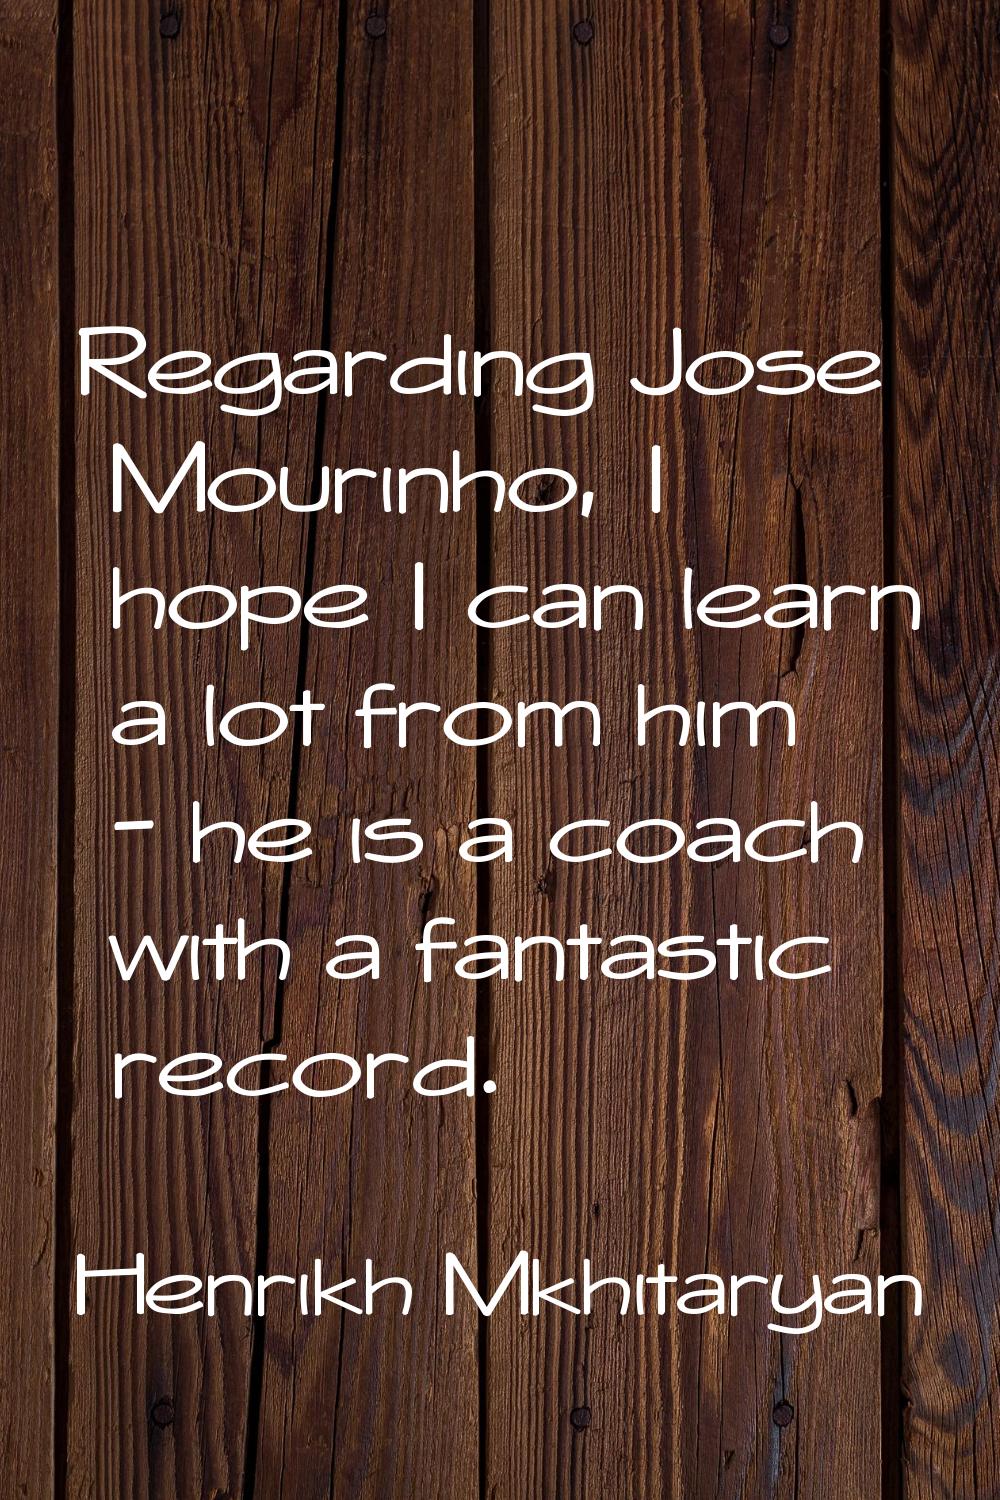 Regarding Jose Mourinho, I hope I can learn a lot from him - he is a coach with a fantastic record.